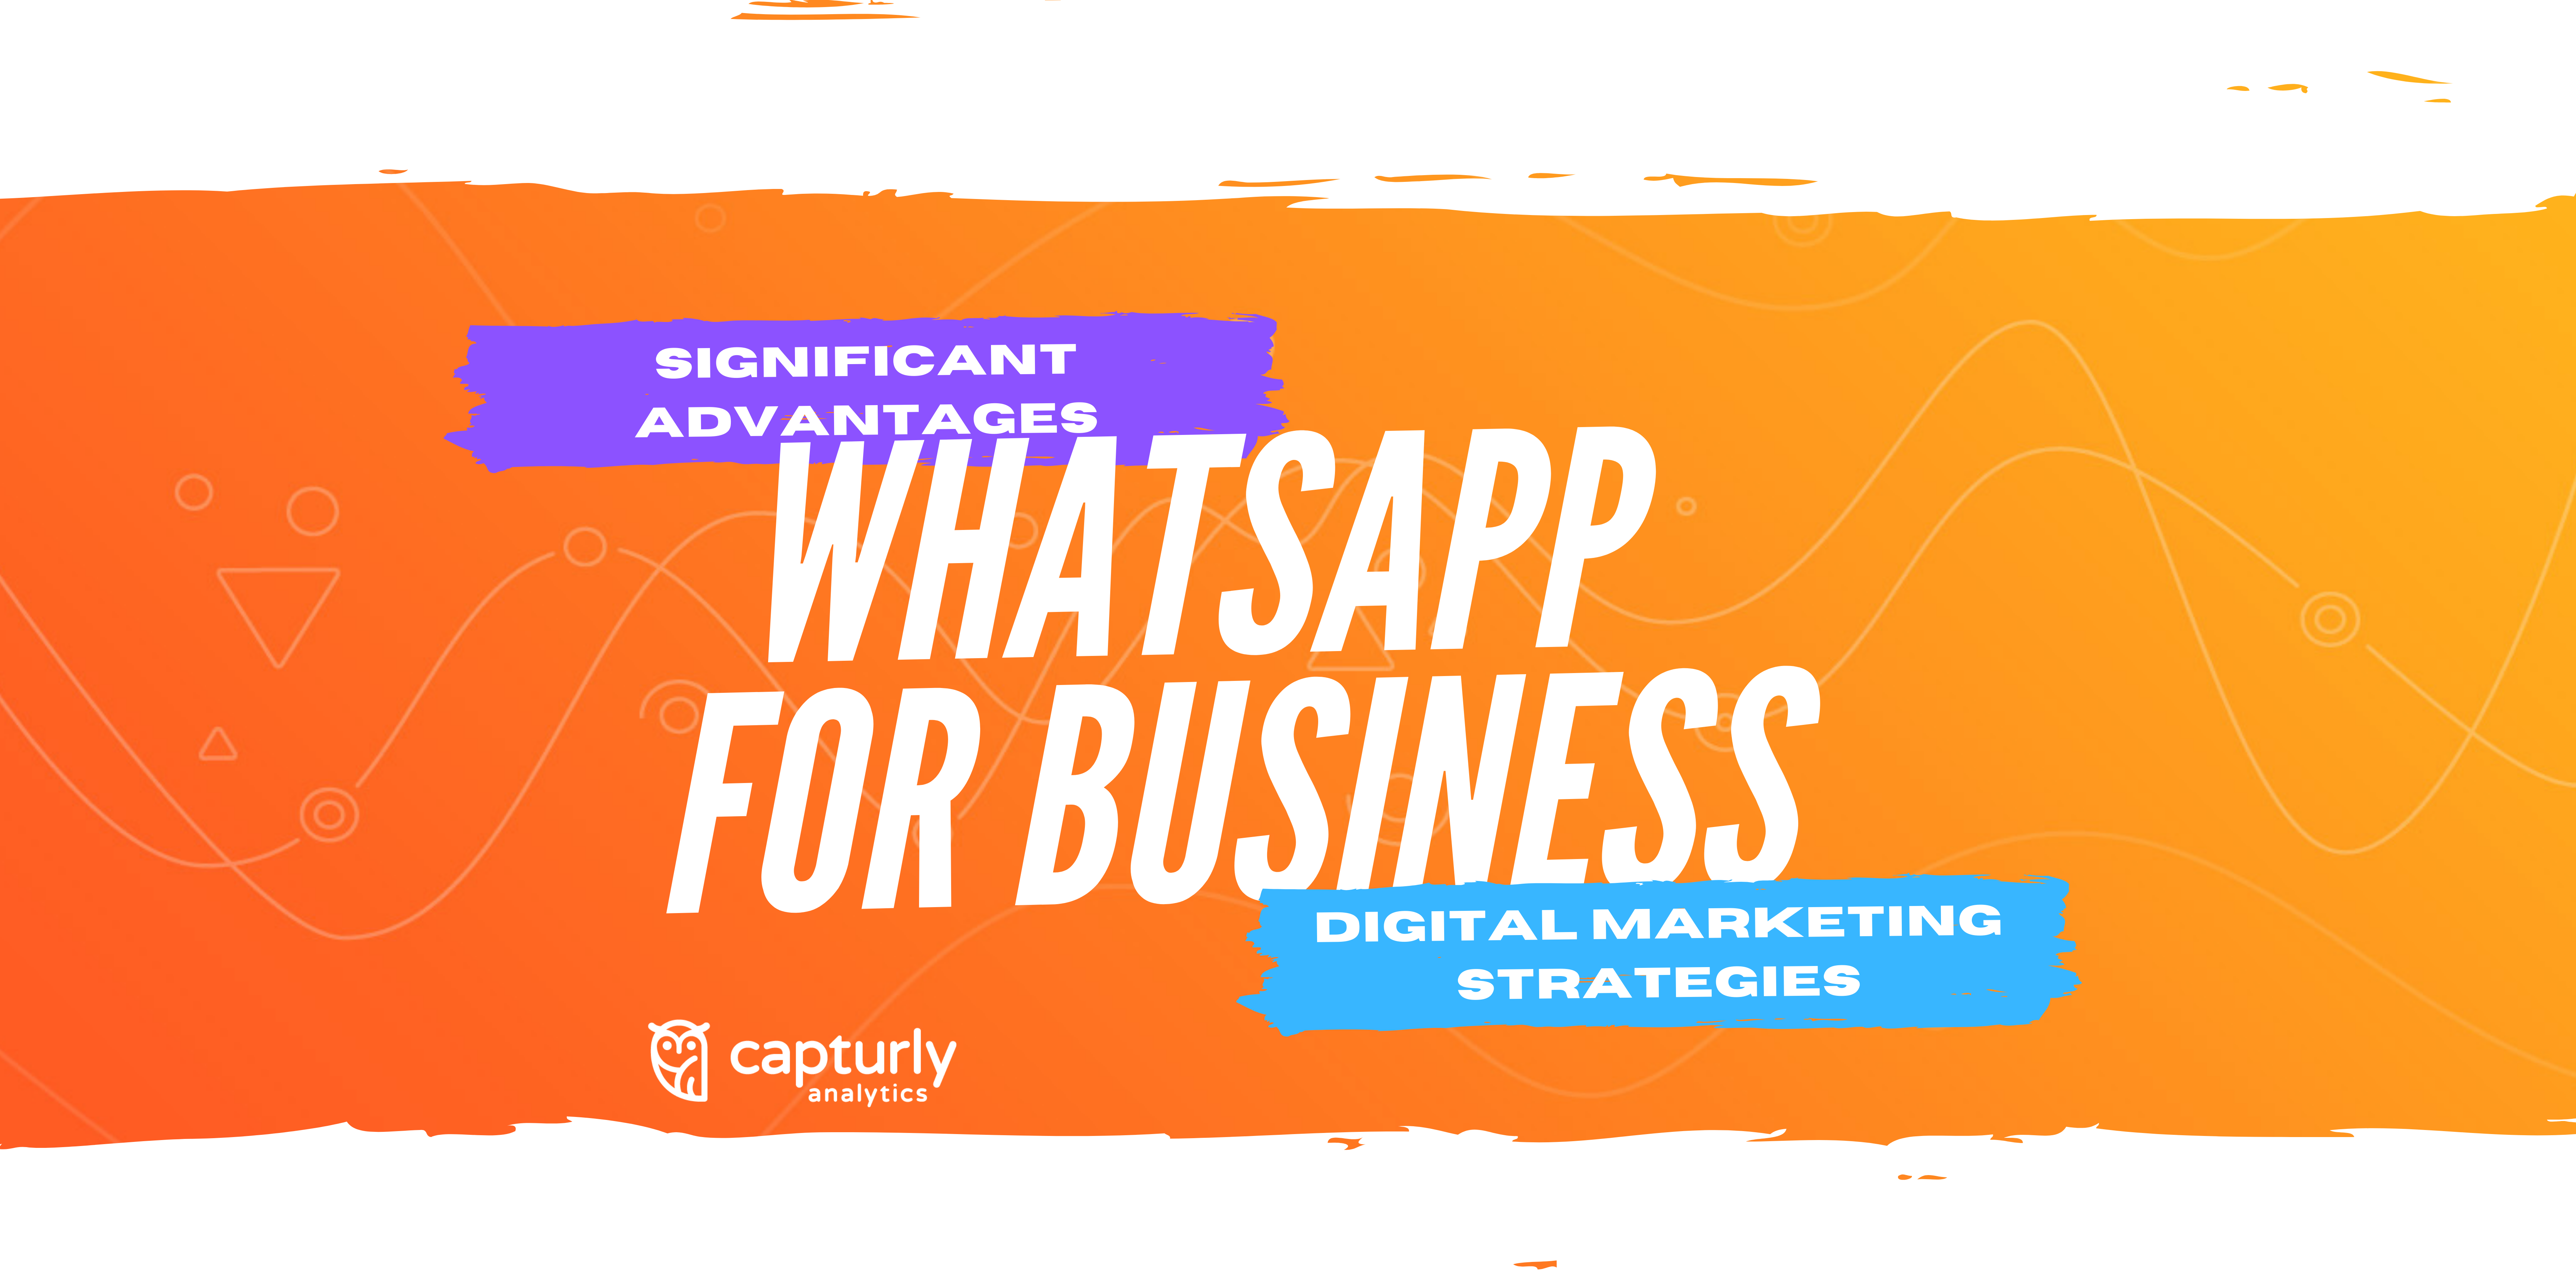 Whatsapp for businesses